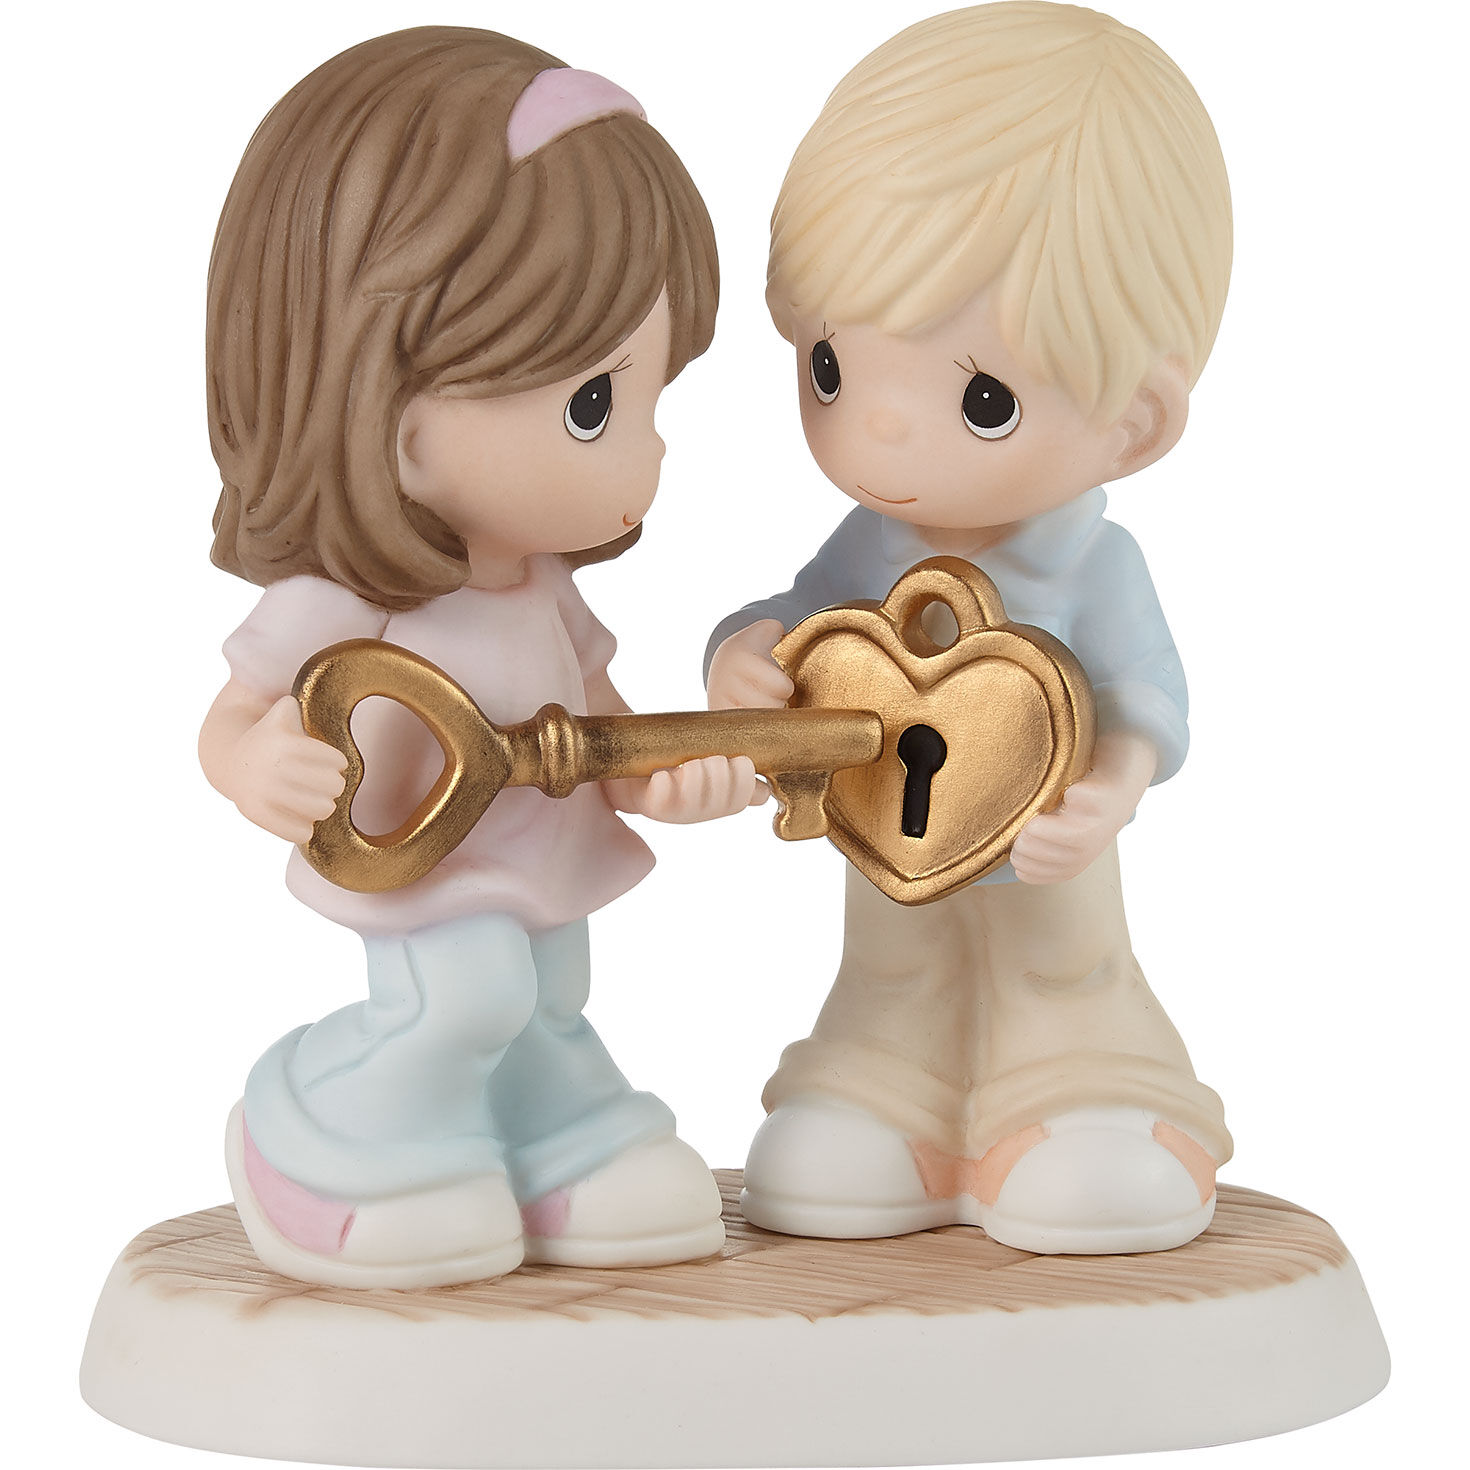 Precious Moments You Have the Key to My Heart Figurine, 5" for only USD 75.99 | Hallmark